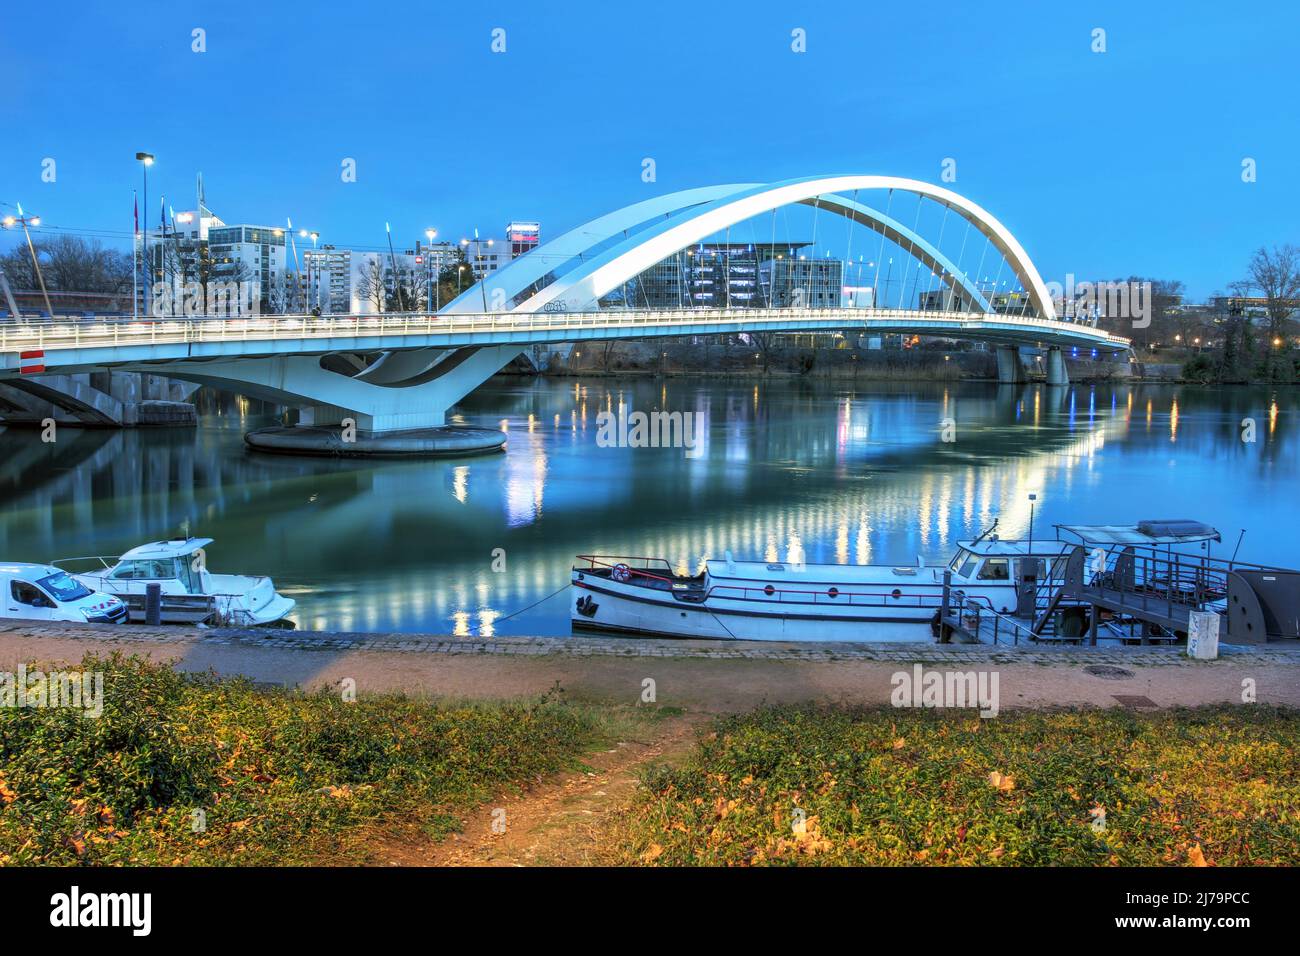 Sunset view of Raymond Barre Bridge over the Rhone between Confluence and Gerland districts in Lyon, France. The beautiful bow-string bridge is reserv Stock Photo